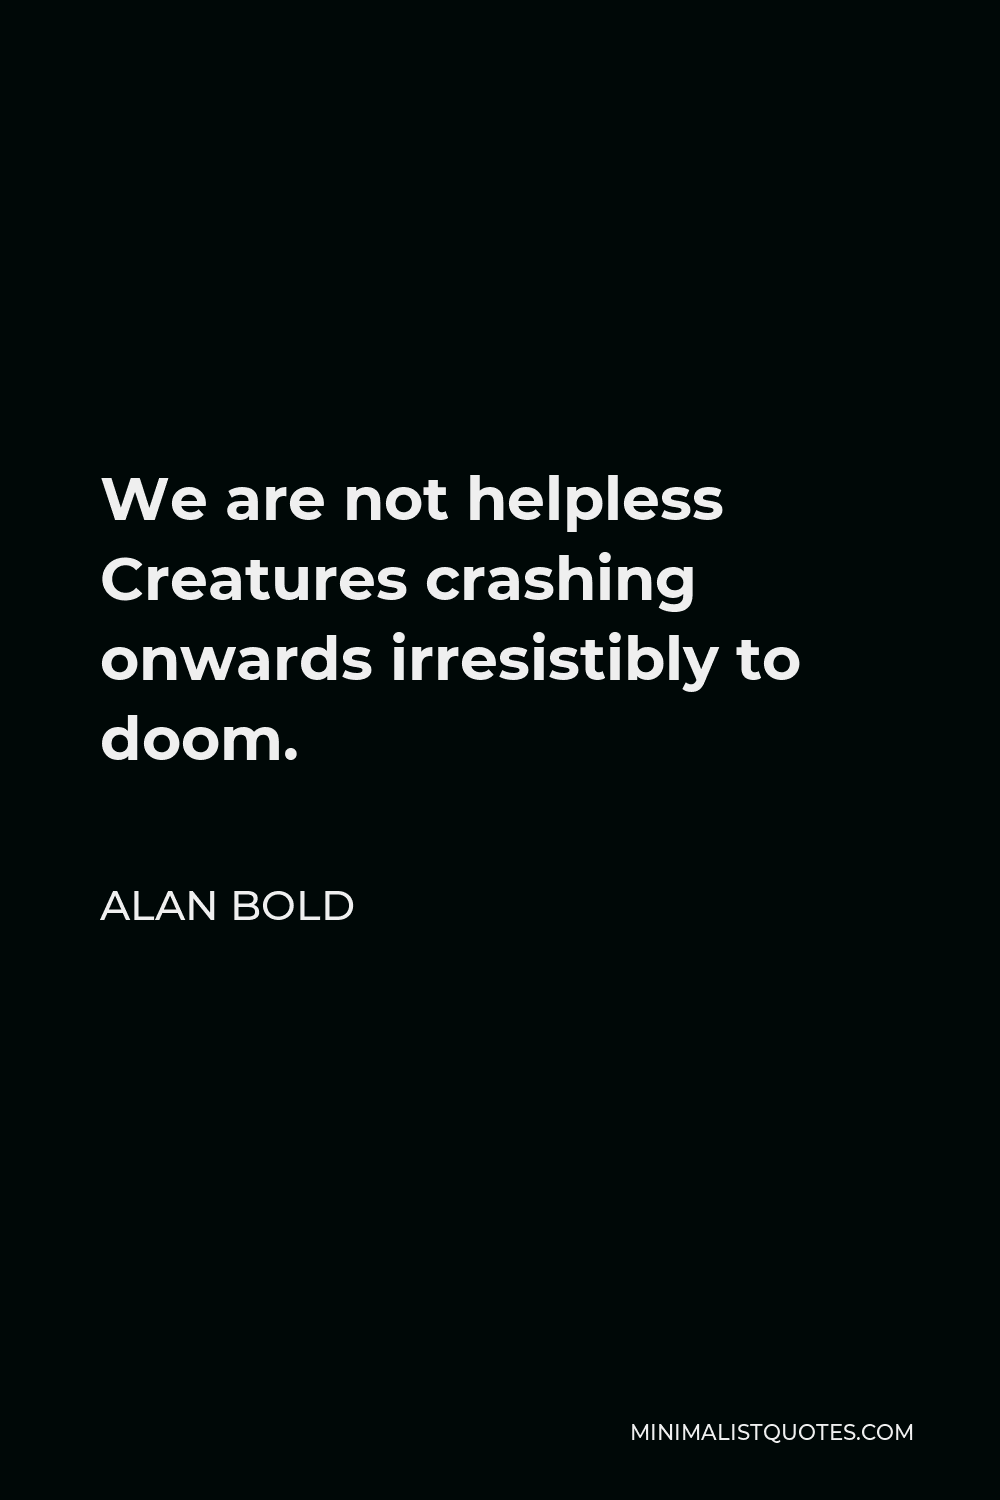 Alan Bold Quote - We are not helpless Creatures crashing onwards irresistibly to doom.